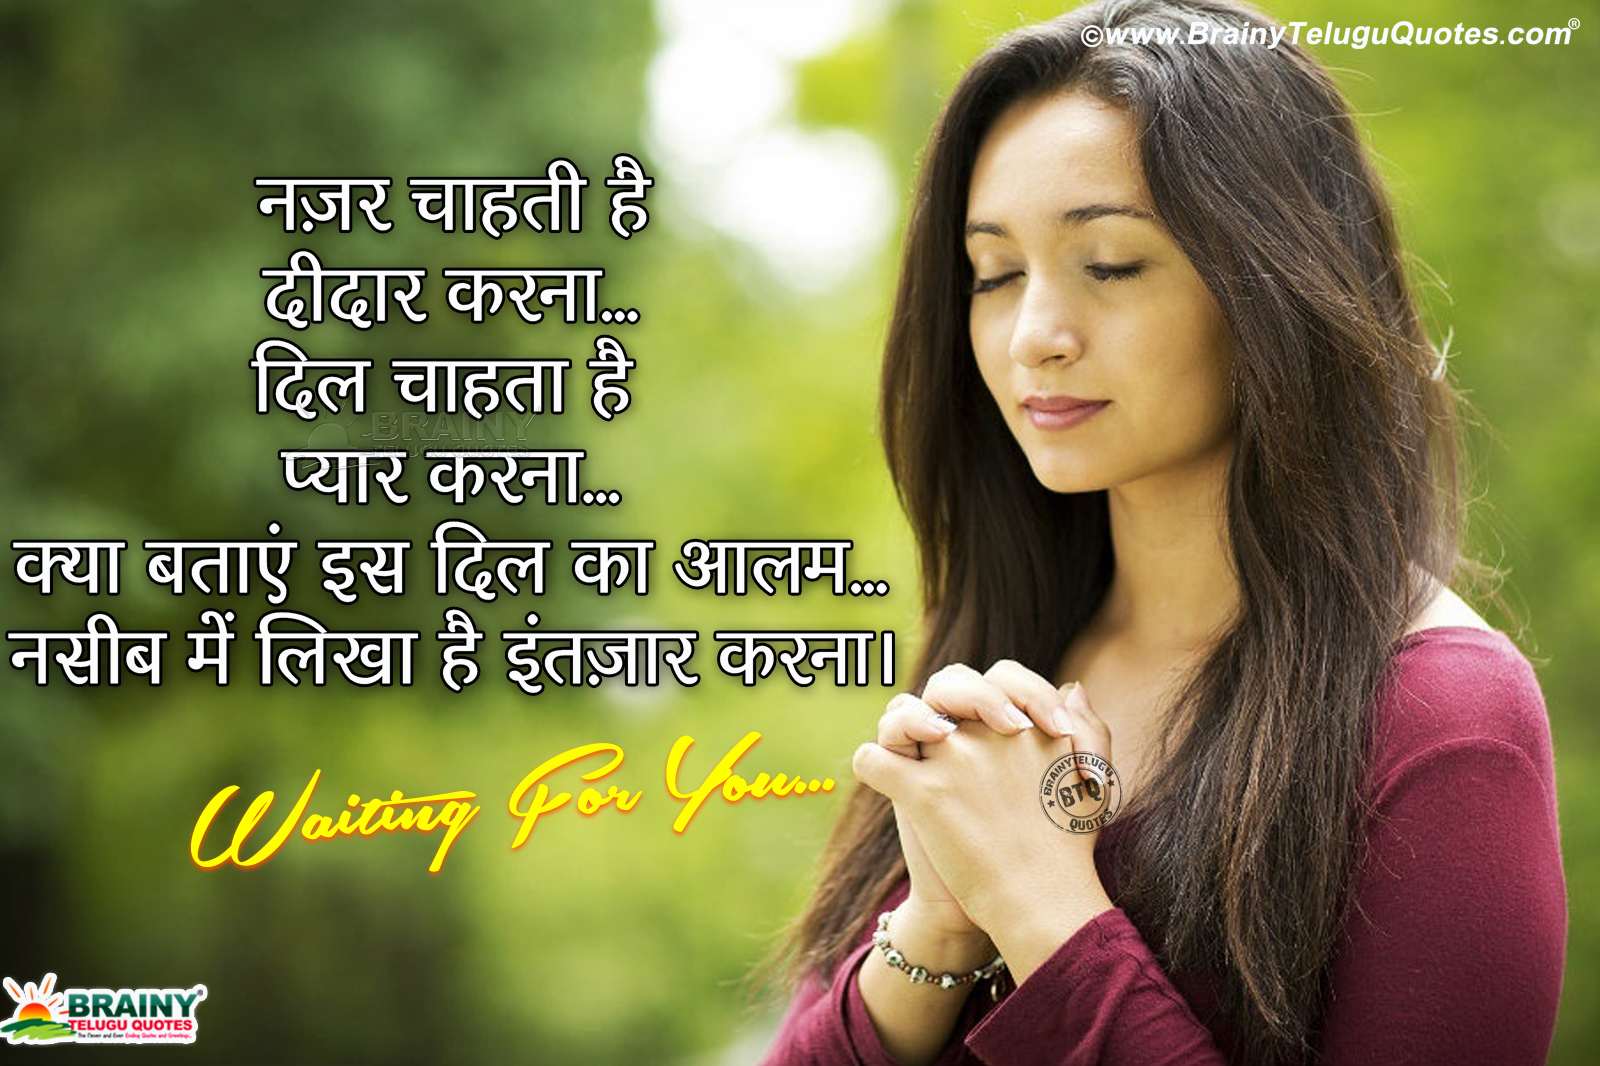 Hindi Waiting For You Quotes hd wallpapers in Hindi-Love ...